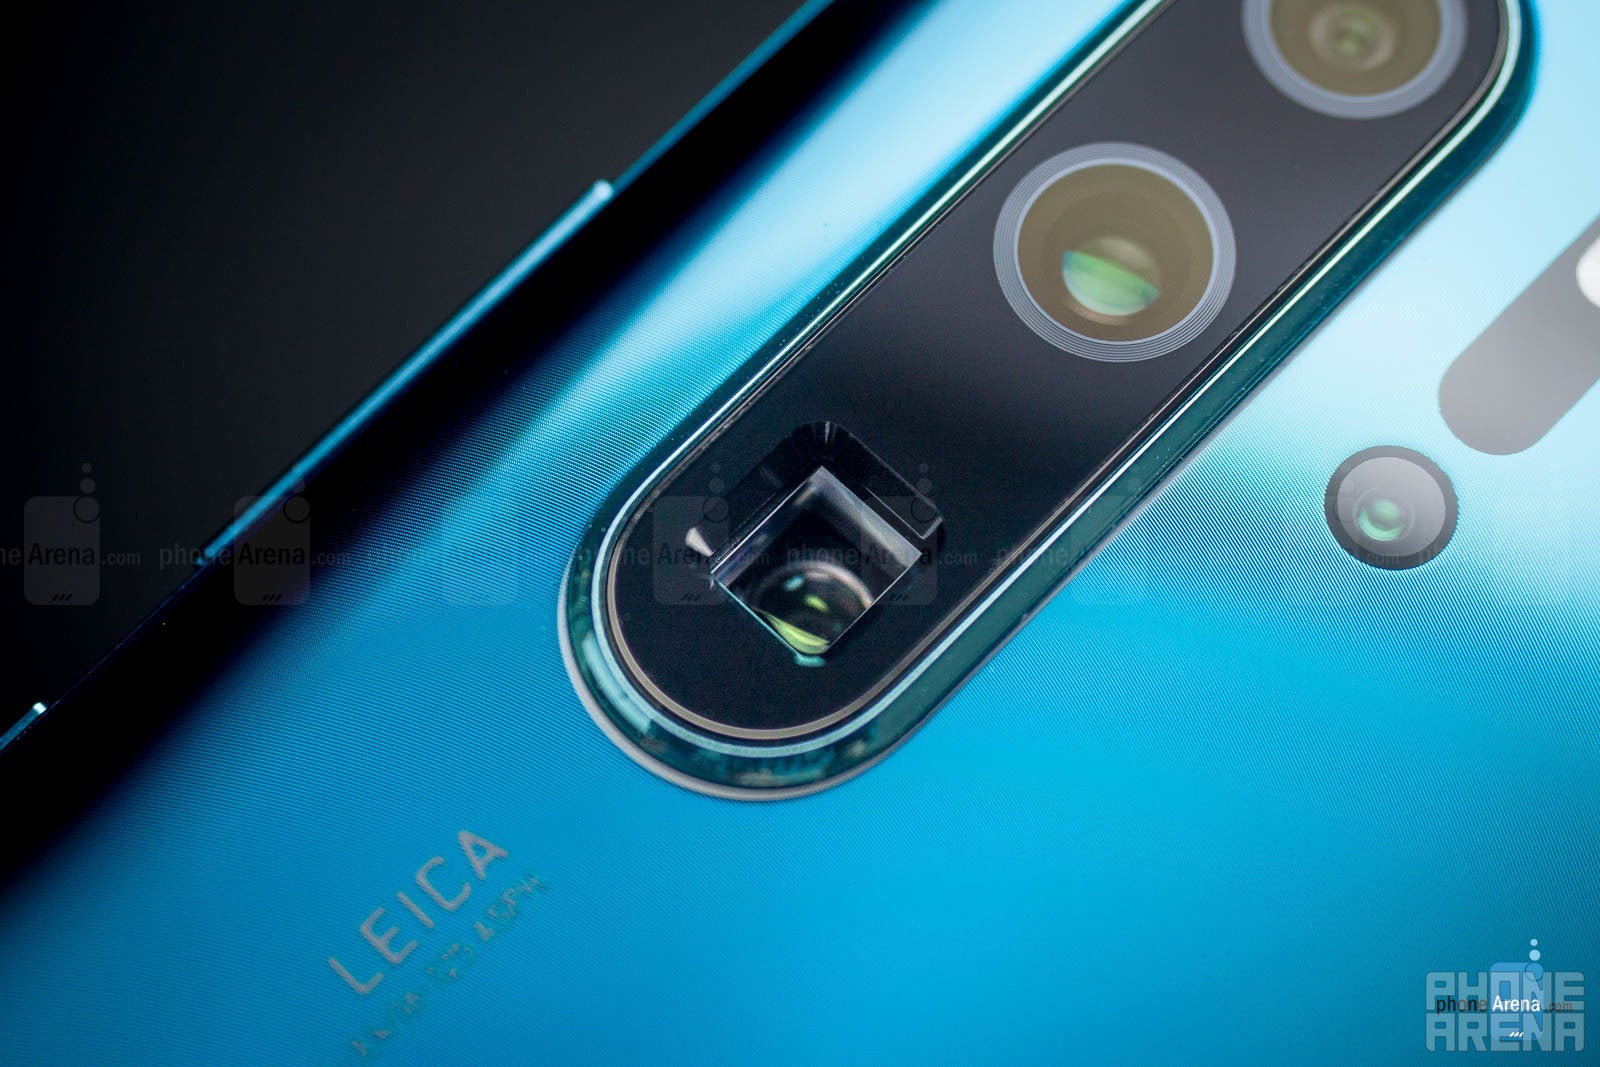 The 8MP telephoto camera on the Huawei P30 Pro provides a whopping 5x magnification using cleverly designed opitcs - The hidden limitations of your phone&#039;s telephoto zoom camera